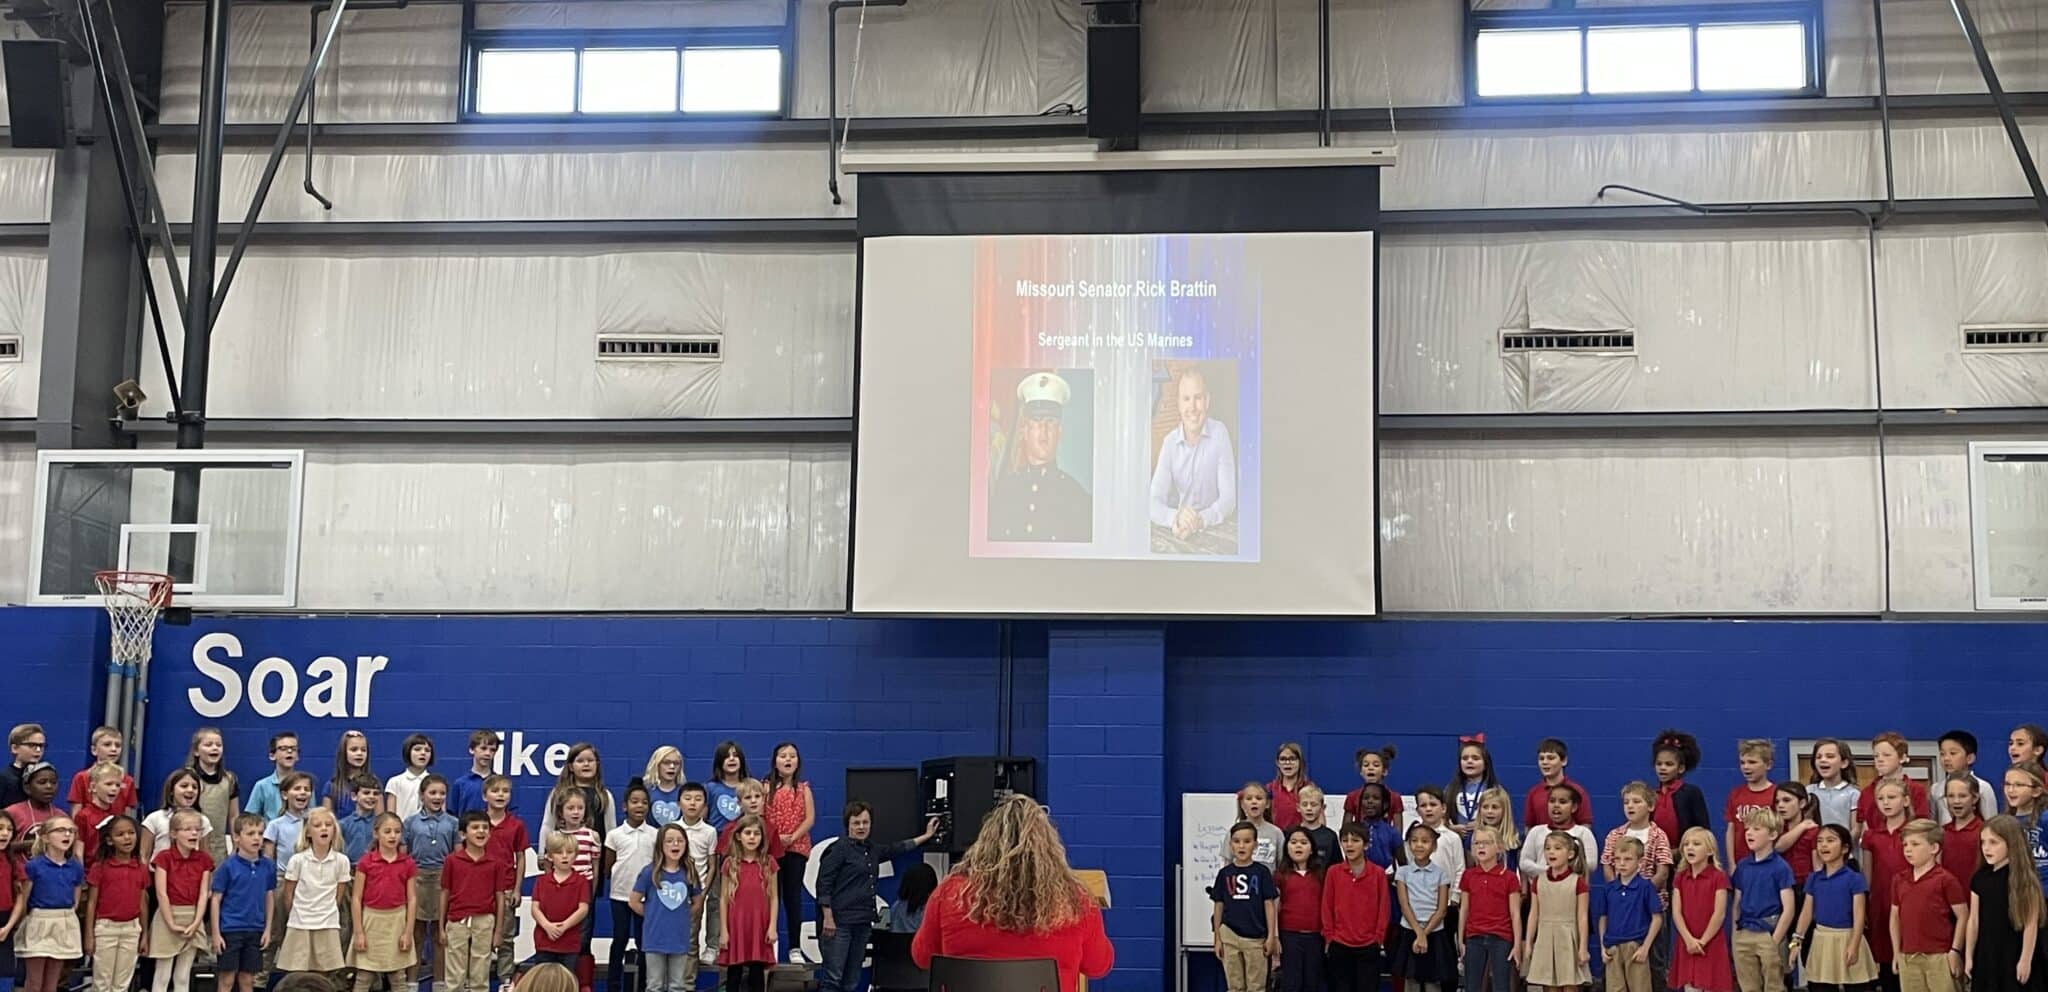 Summit Christian Academy (SCA) second grade students sang “Thank You, Soldiers” at the conclusion of the annual Veterans Day chapel service. The service honored all Veterans, including many active and retired service members in attendance.